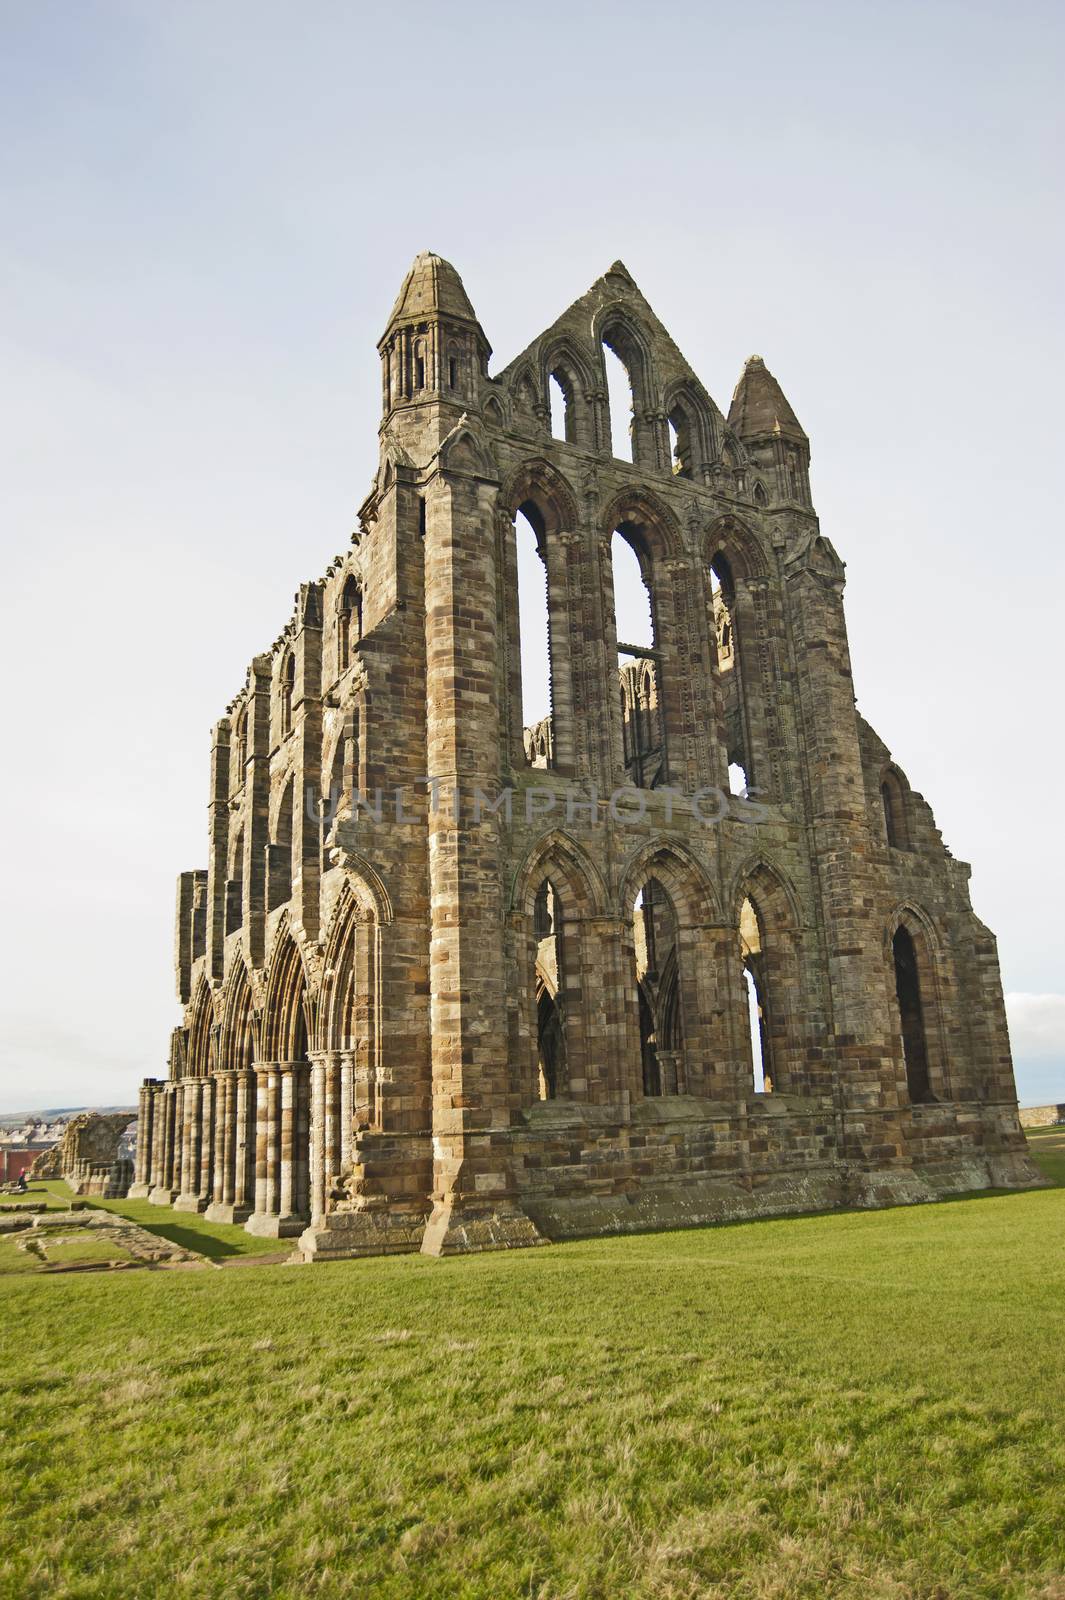 Ruins of a large ancient English Abbey